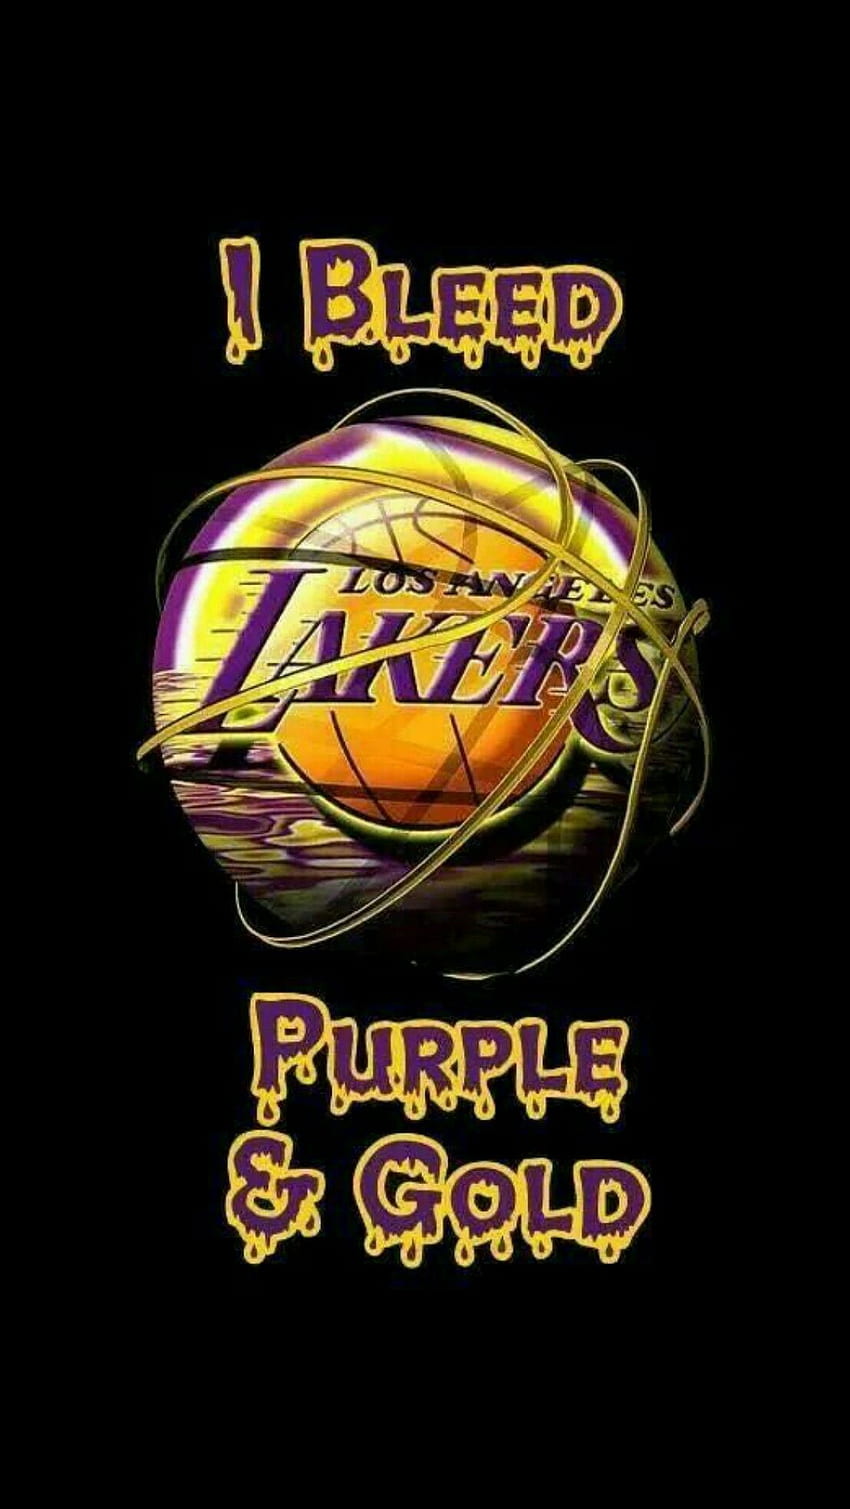 The hd wallpaper picture Los Angeles Lakers Wallpaper has been  downloaded Explore more other HD wallpaper y  Lakers wallpaper Los  angeles wallpaper La lakers